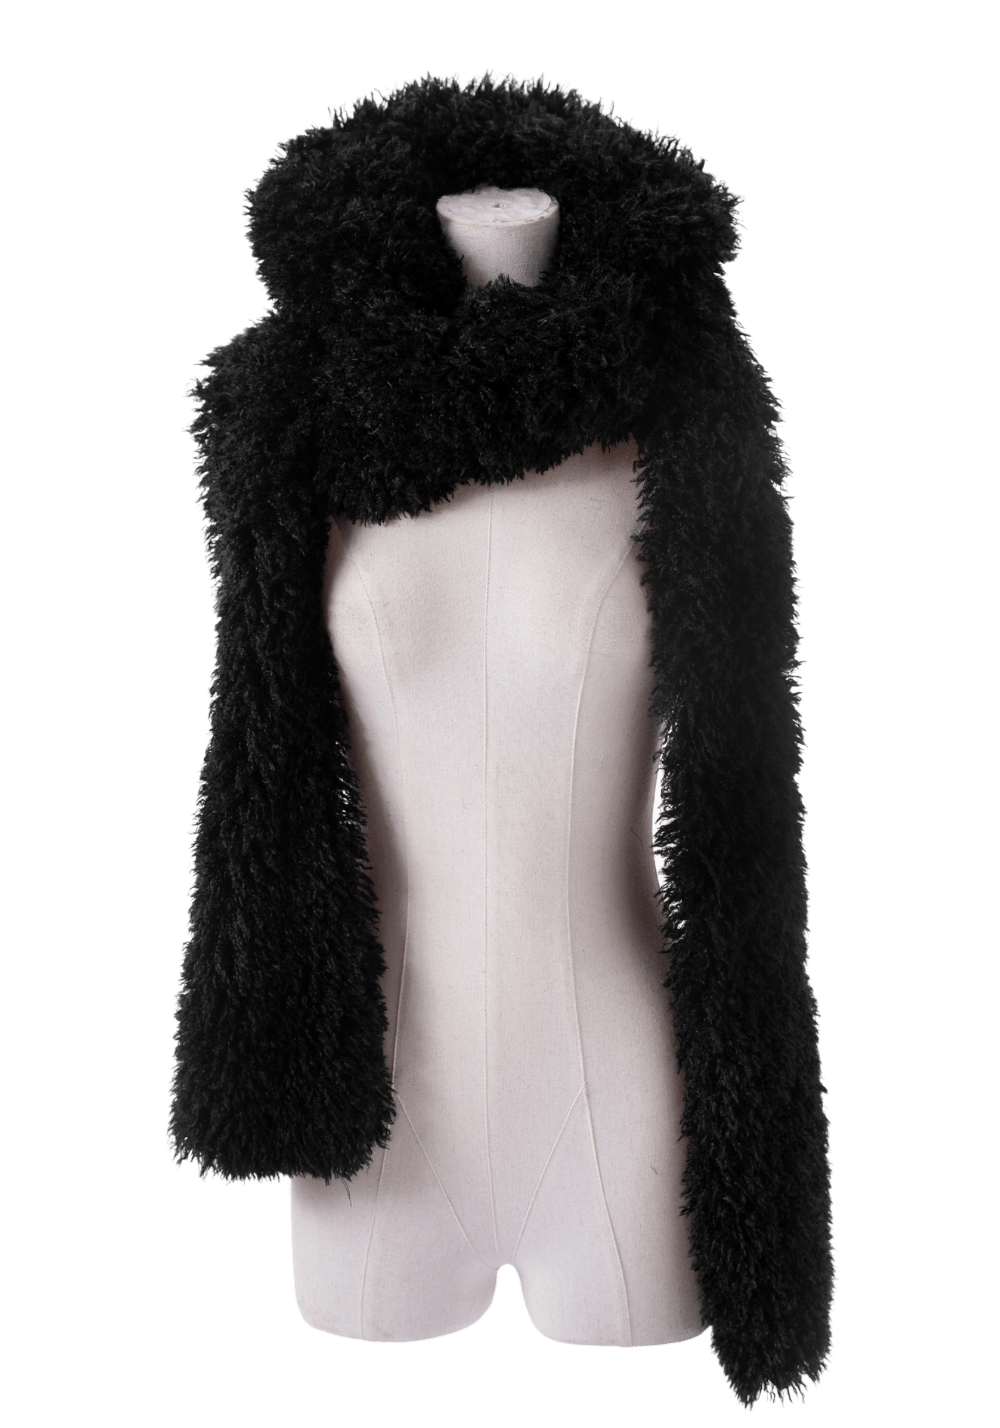 Snood Hat - PSYLOS 1, Snood Hat, Accessories, Jqwention, PSYLOS 1